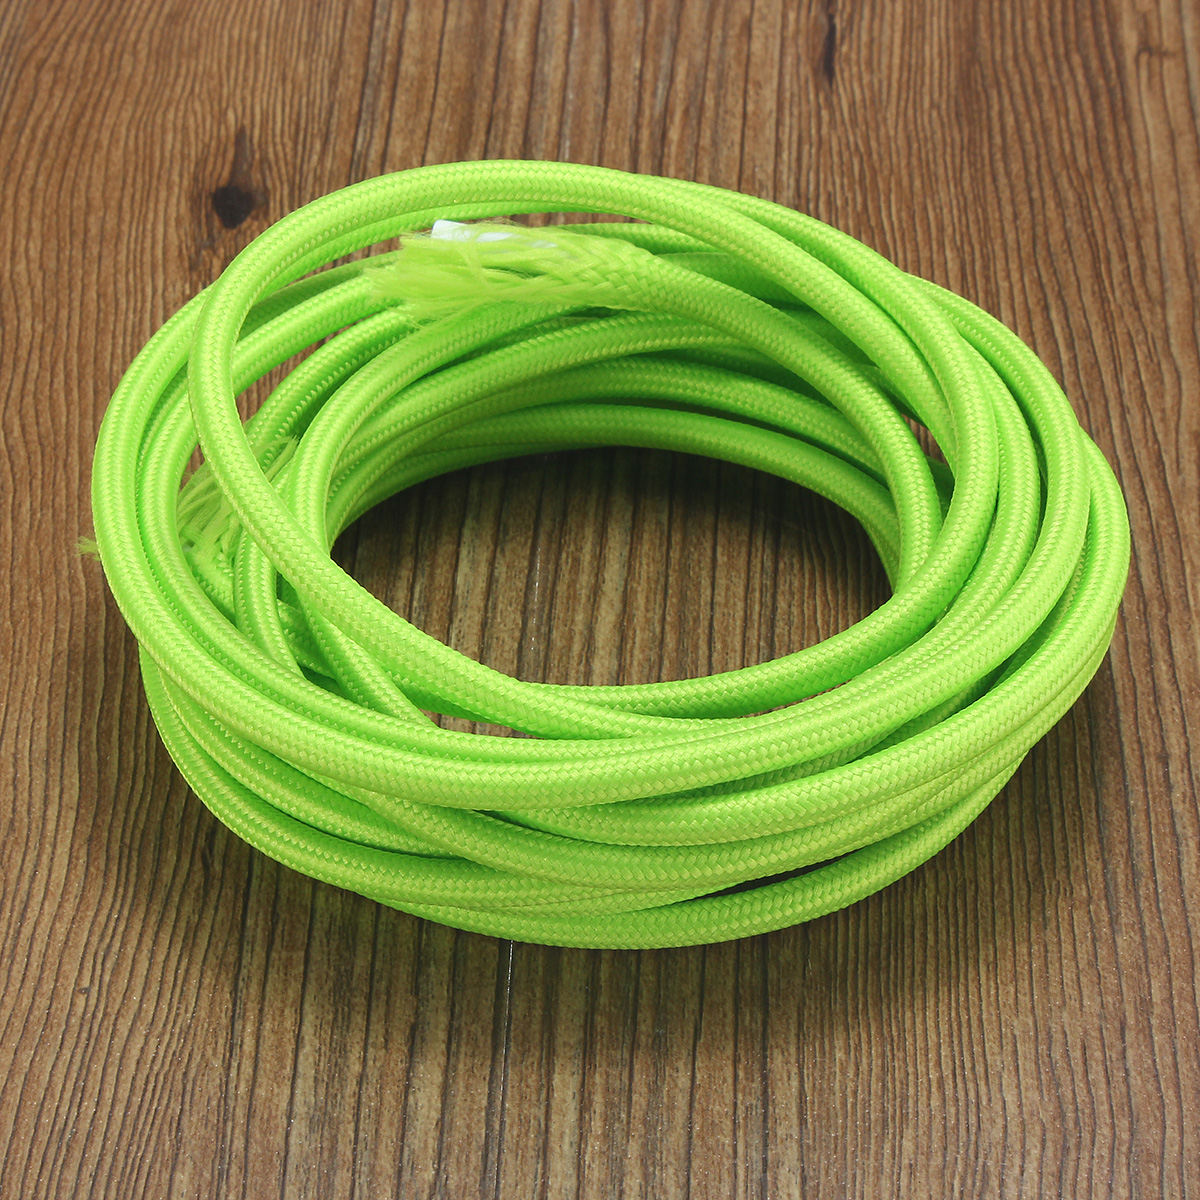 5M-2-Cord-Color-Vintage-Twist-Braided-Fabric-Light-Cable-Electric-Wire-1069142-4